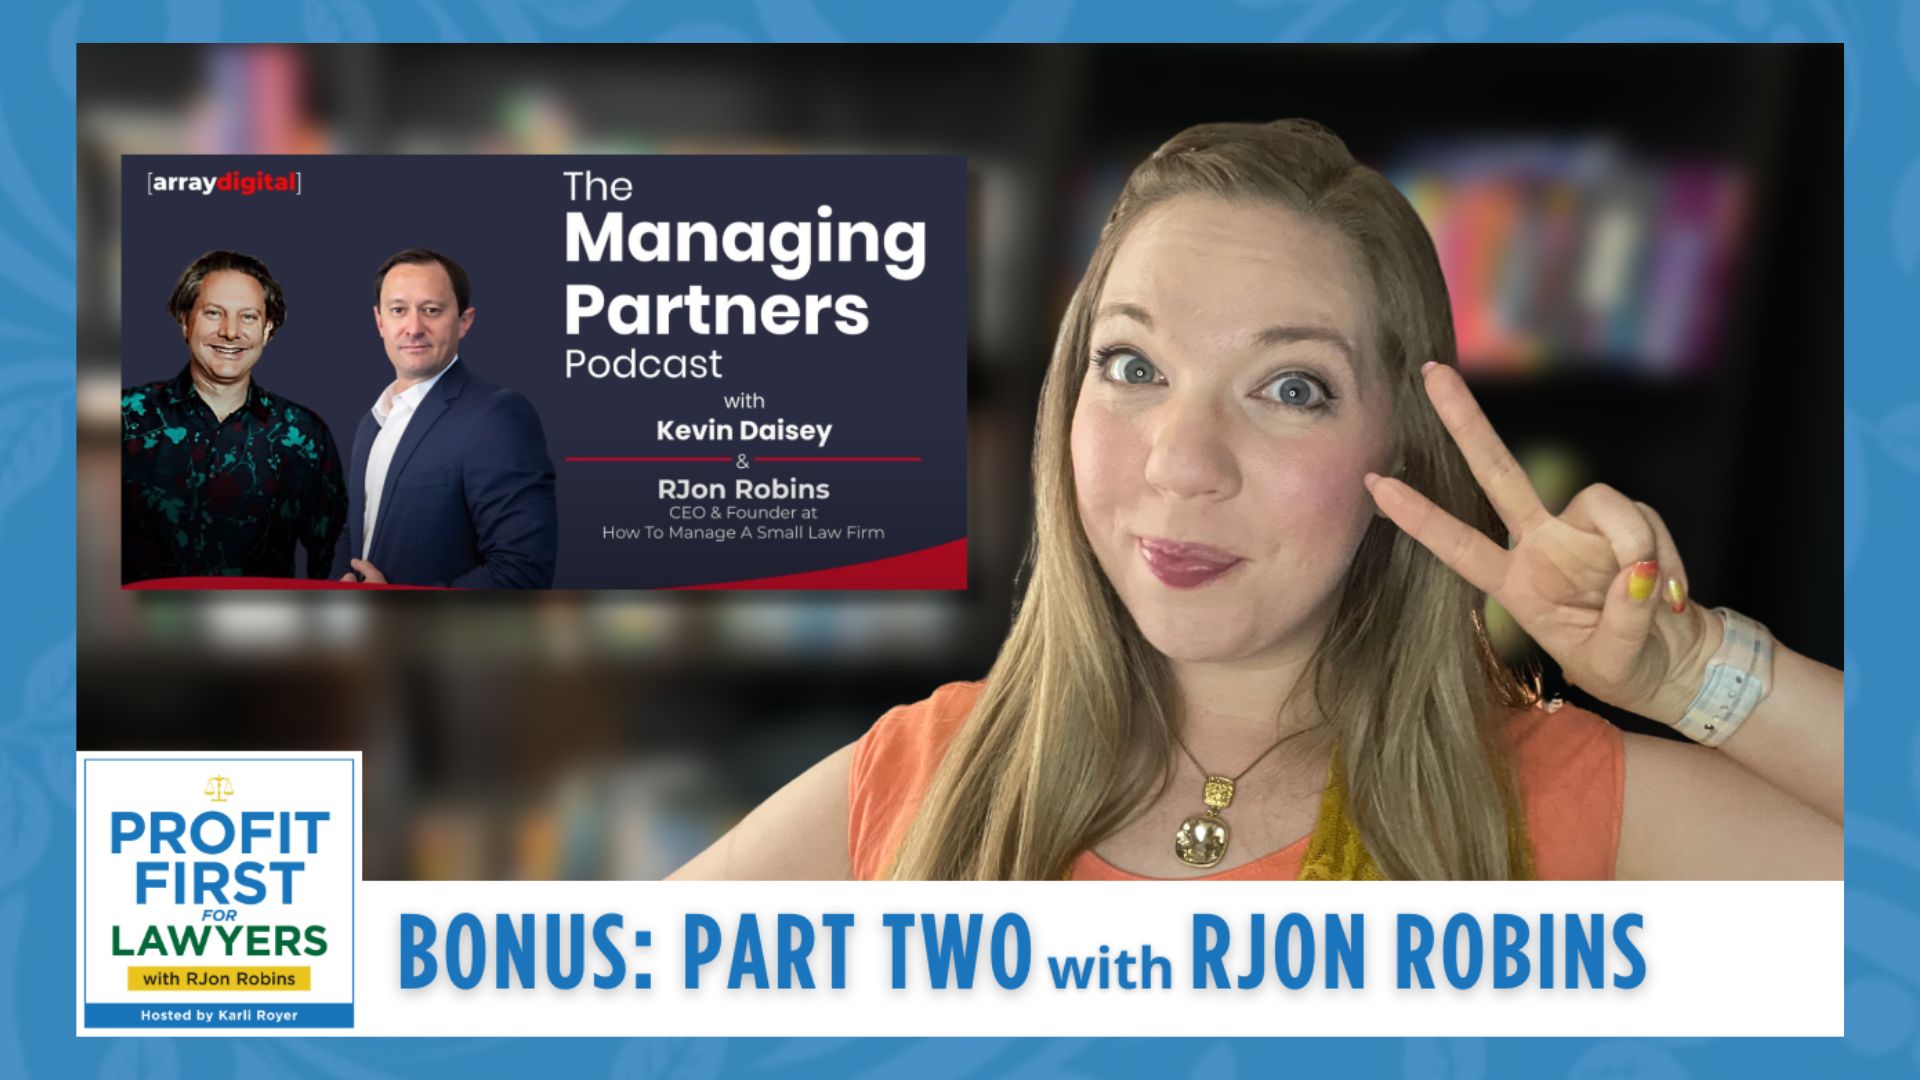 Featured image of Karli Royer holding two fingers up. Also picture in picture of The Managing Partners Podcast thumbnail featuring RJon Robins and hosted by Kevin Daisey. Title: Bonus: Part Two with RJon Robins